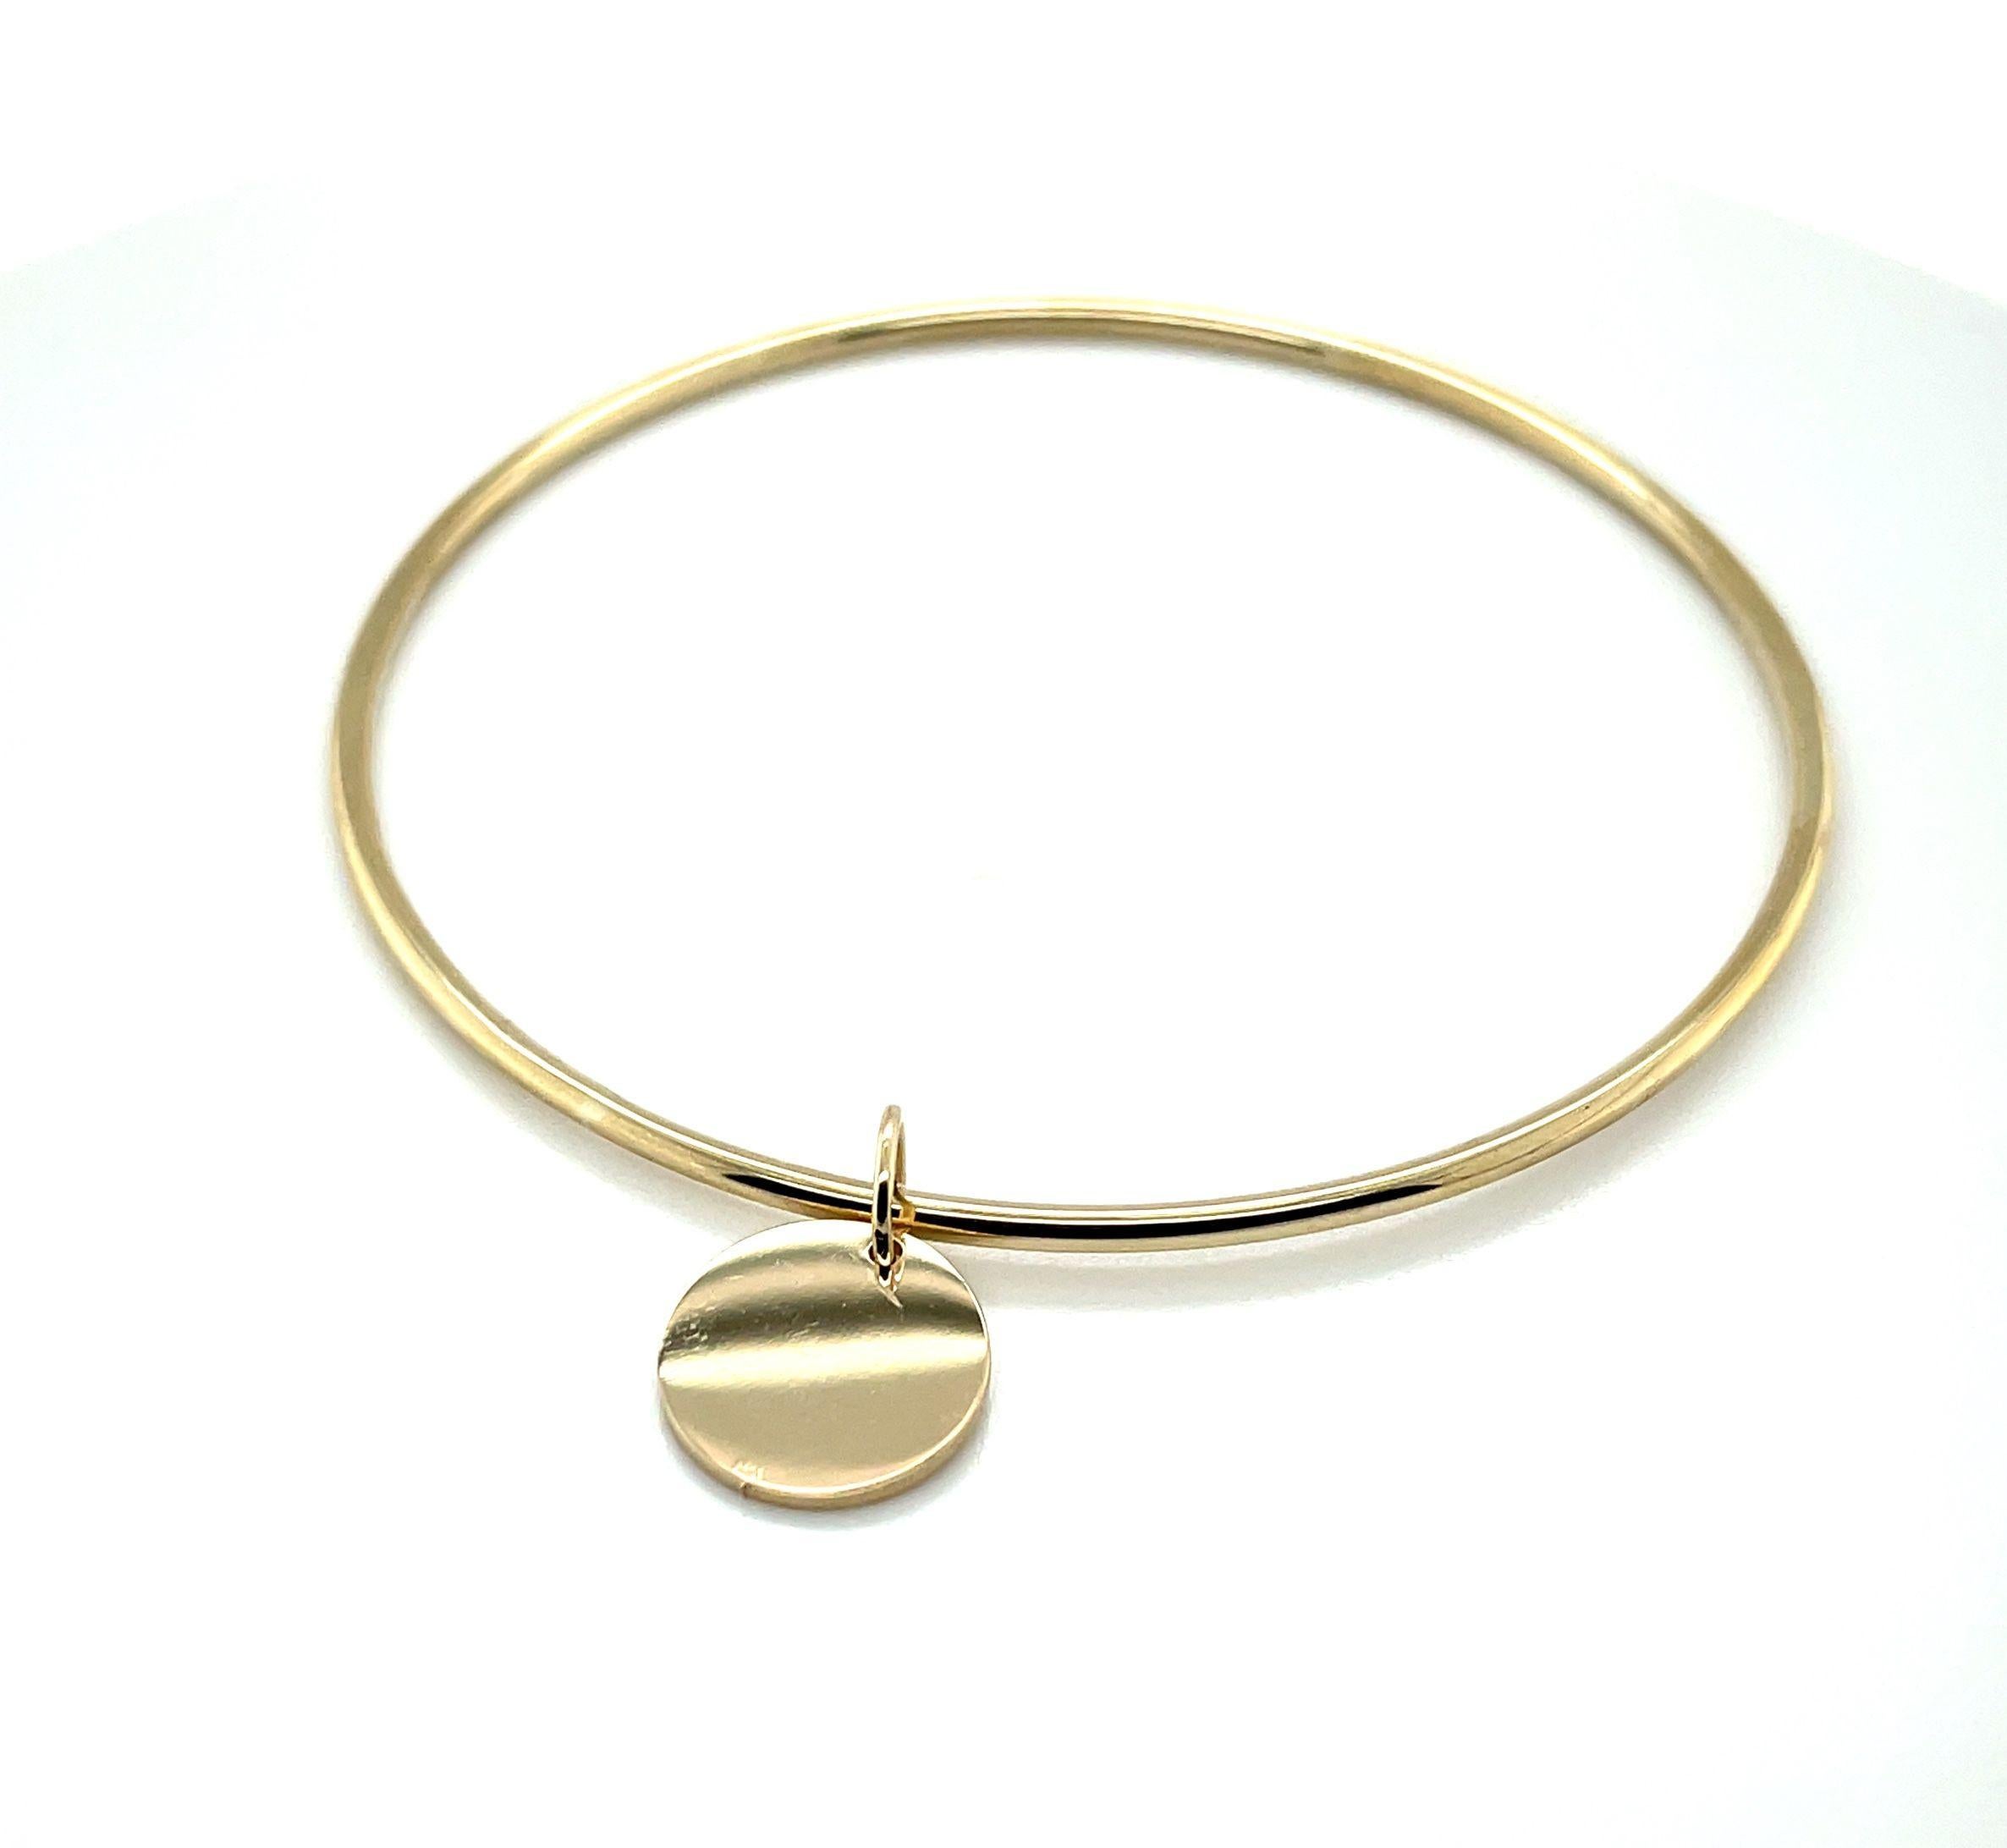 Women's or Men's Round Bangle Bracelet with Engravable Charm in 14k Yellow Gold For Sale